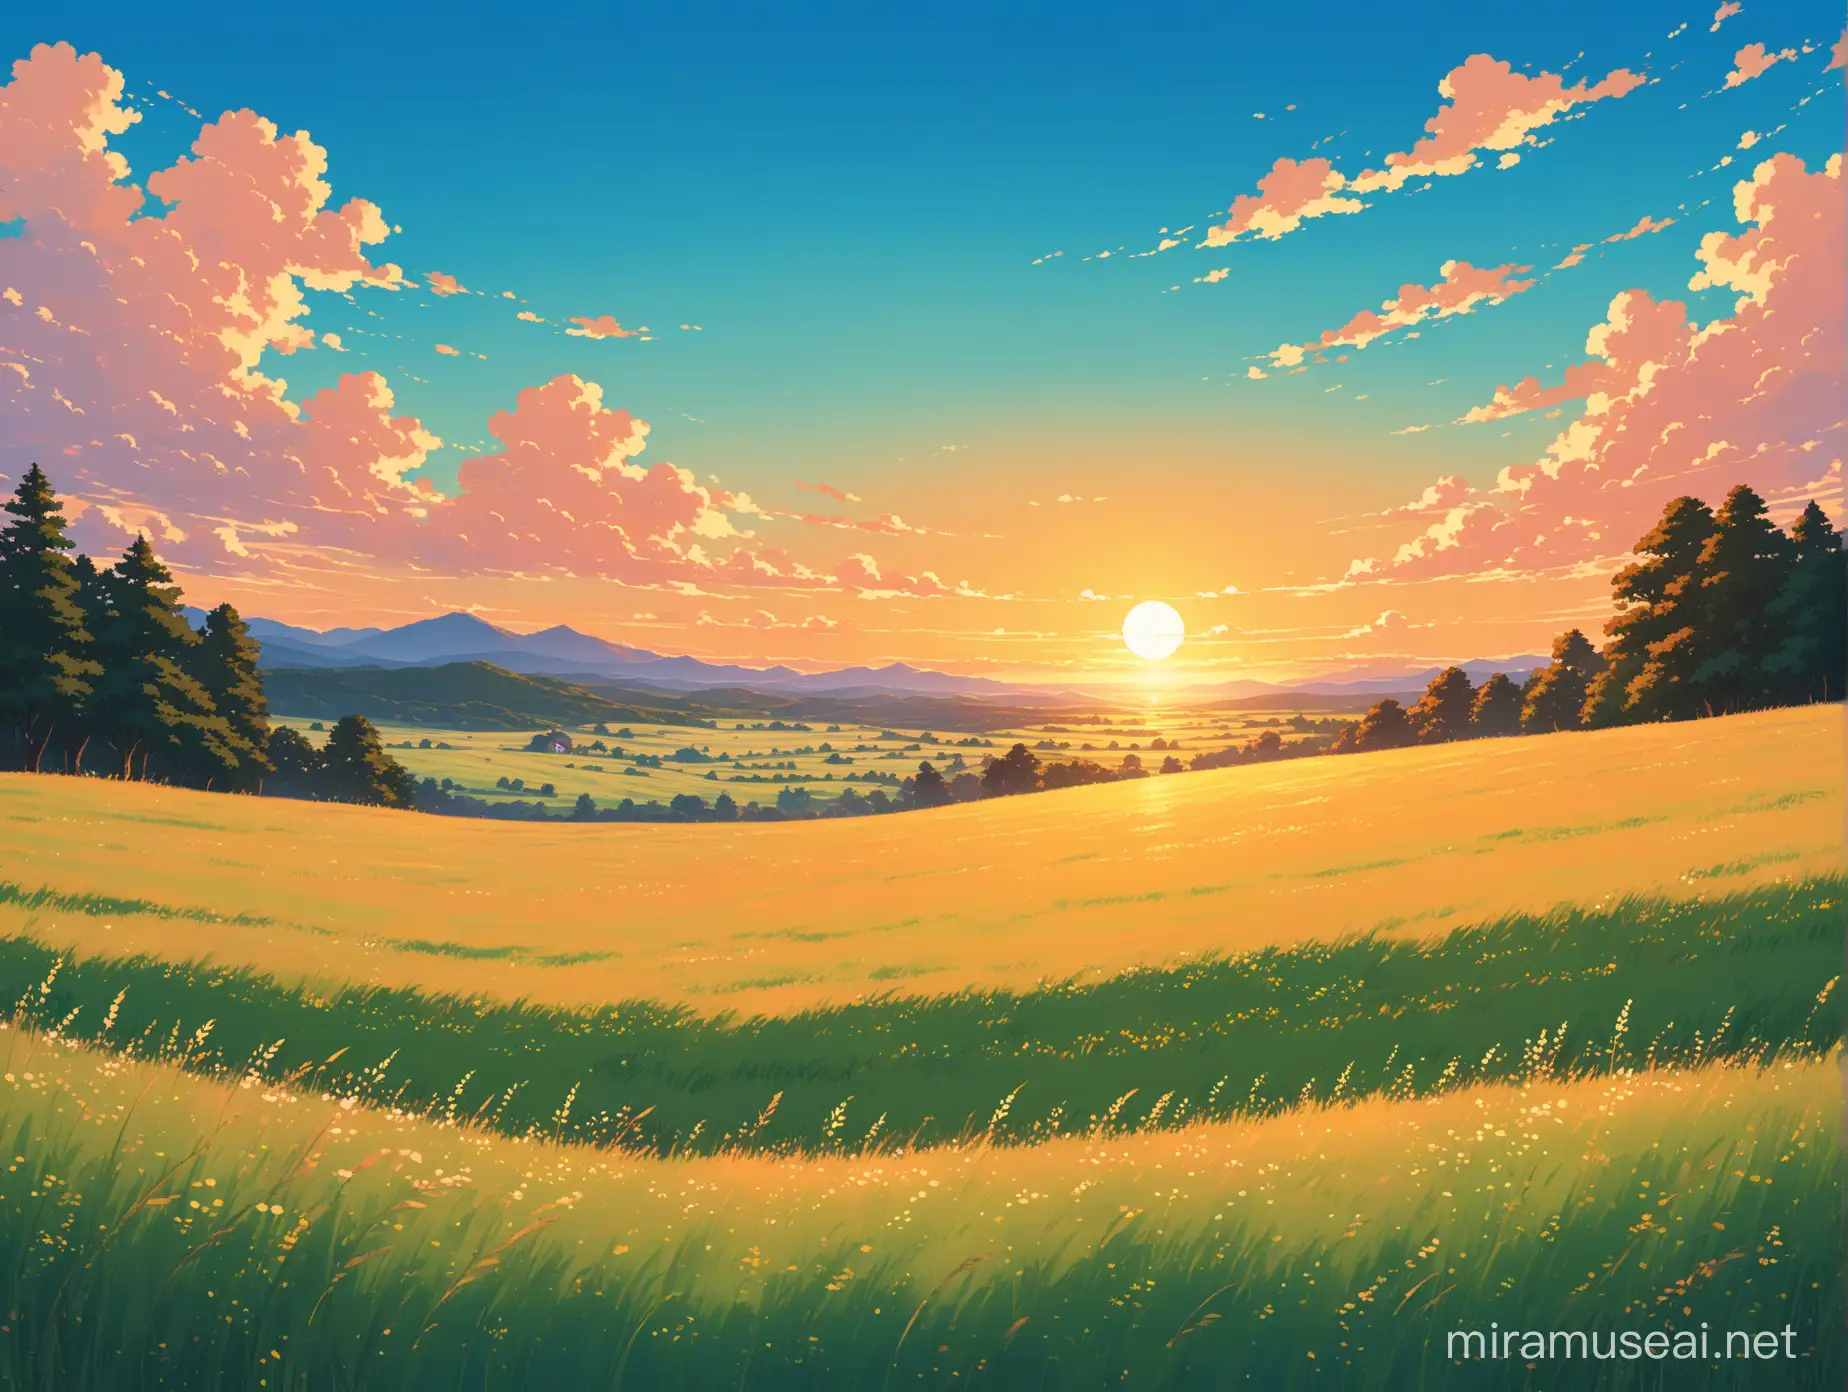 Sunset Meadow with Clear Blue Sky in Ghibli Style